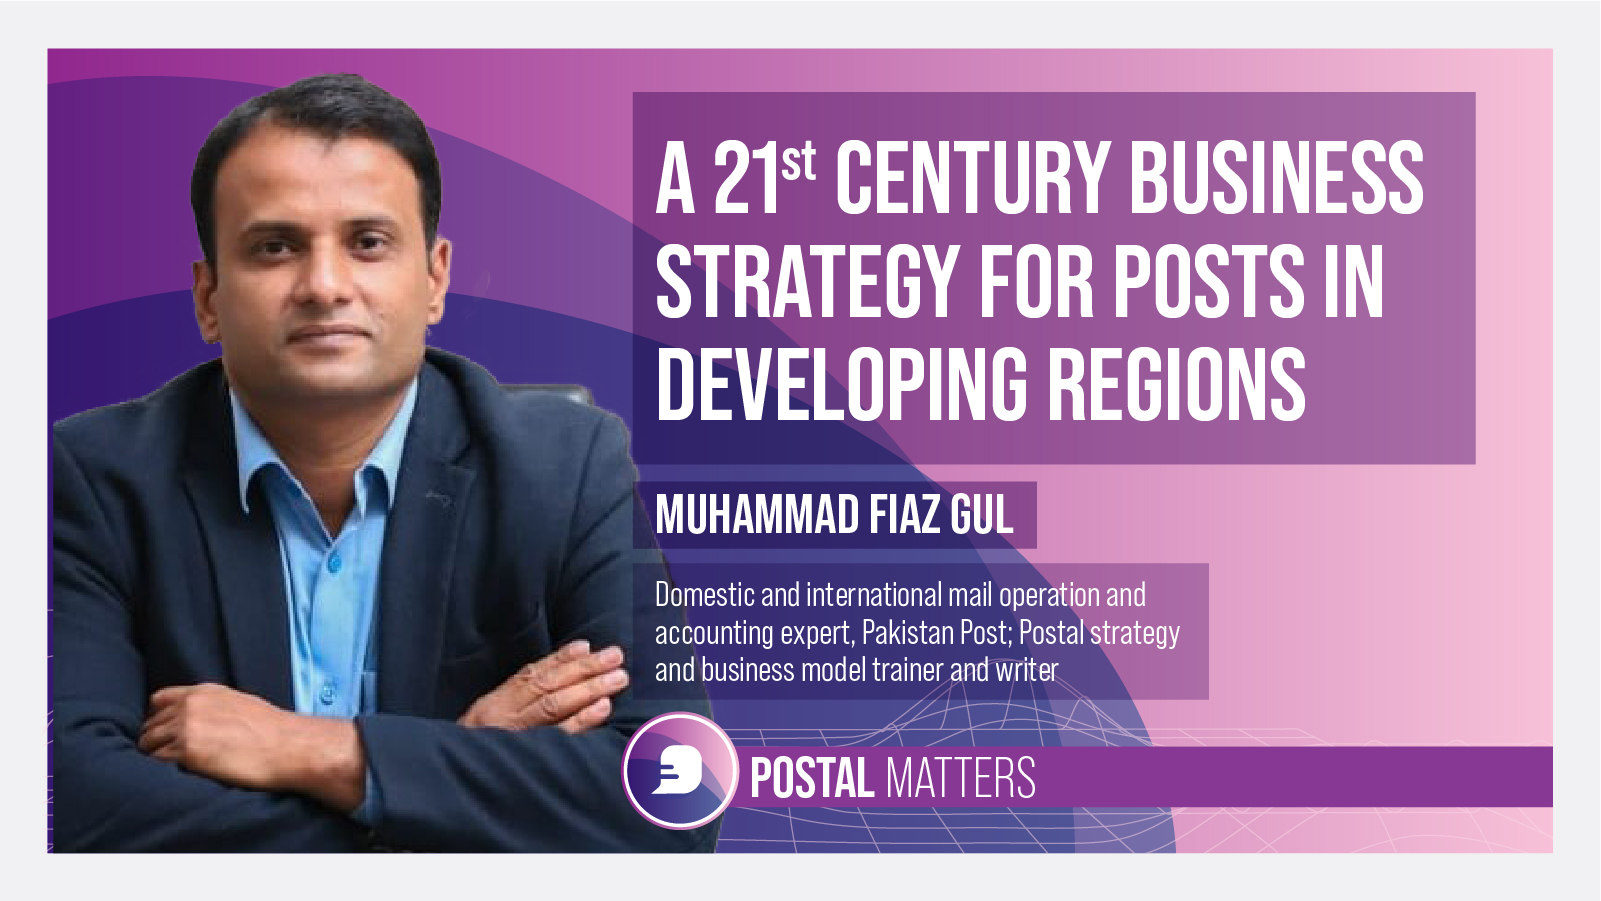 A 21st Century Business Strategy for Posts in Developing Regions